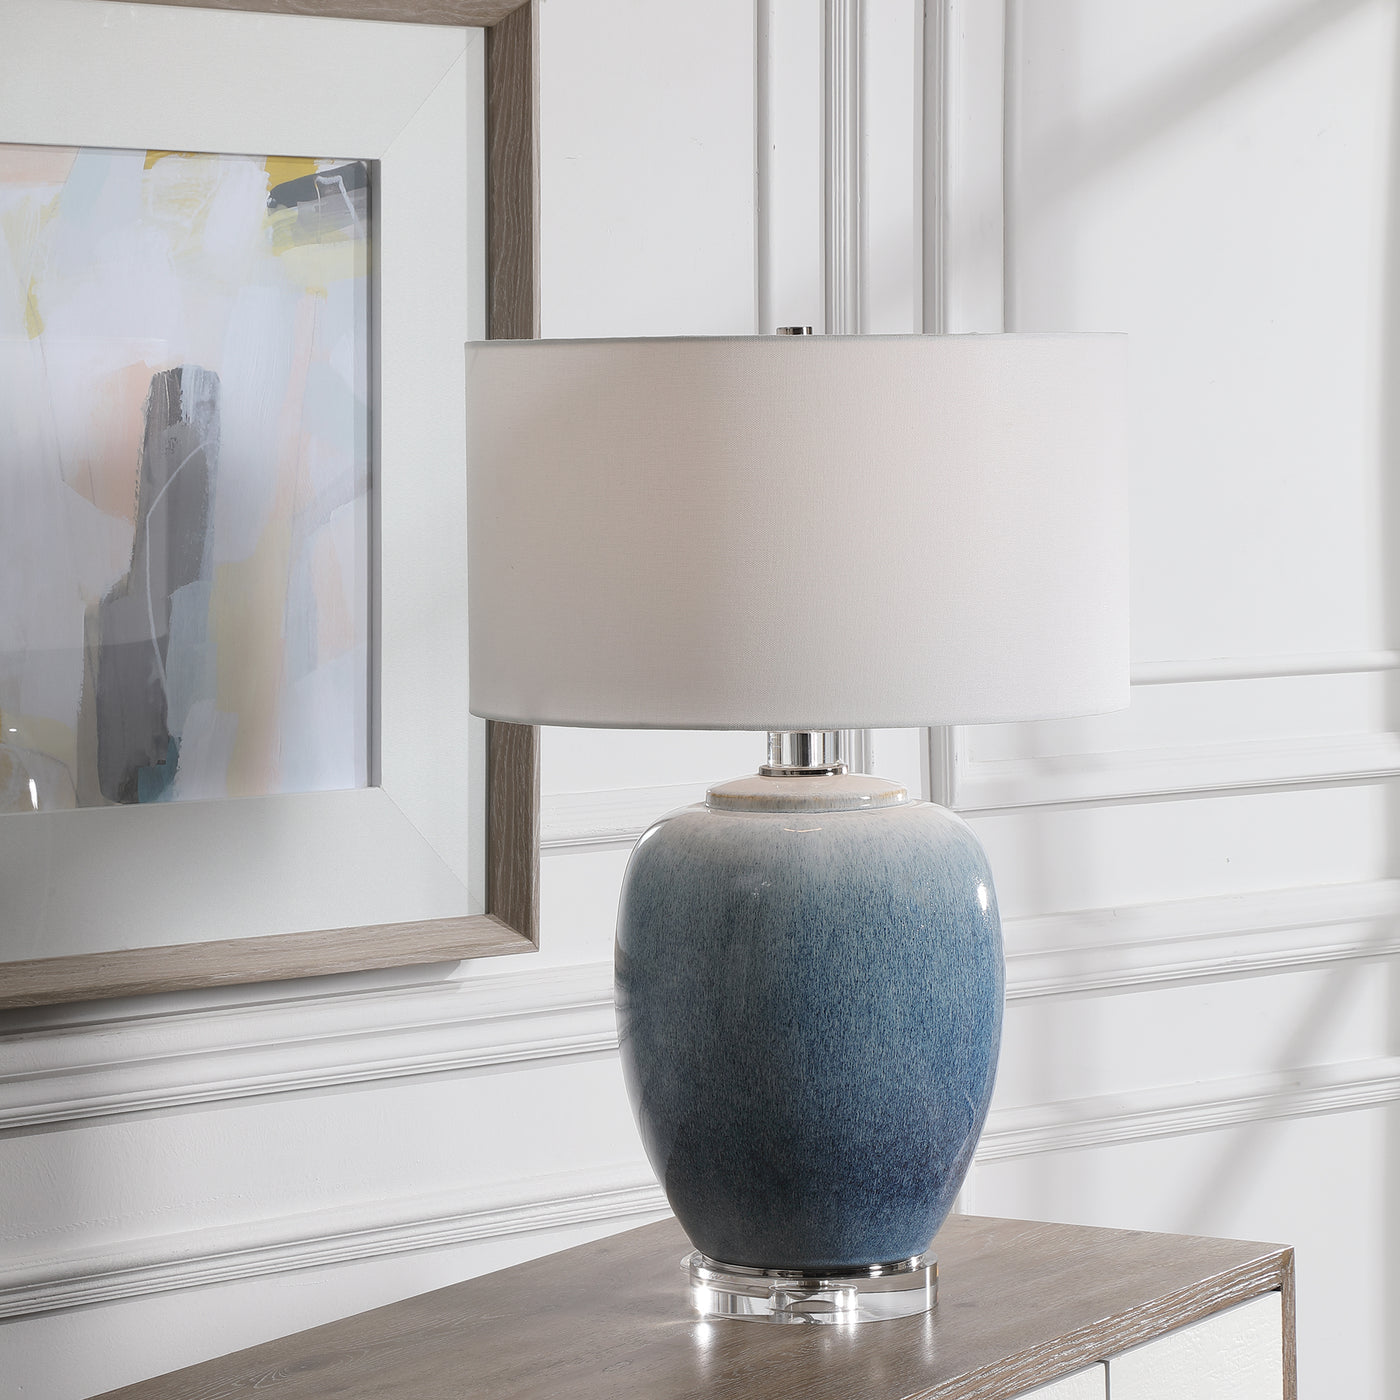 Ceramic Table Lamp Showcases Vibrant Shades Of Cobalt And Aqua That Transition Into A Subtle Ombre Toned Light Blue. Polis...